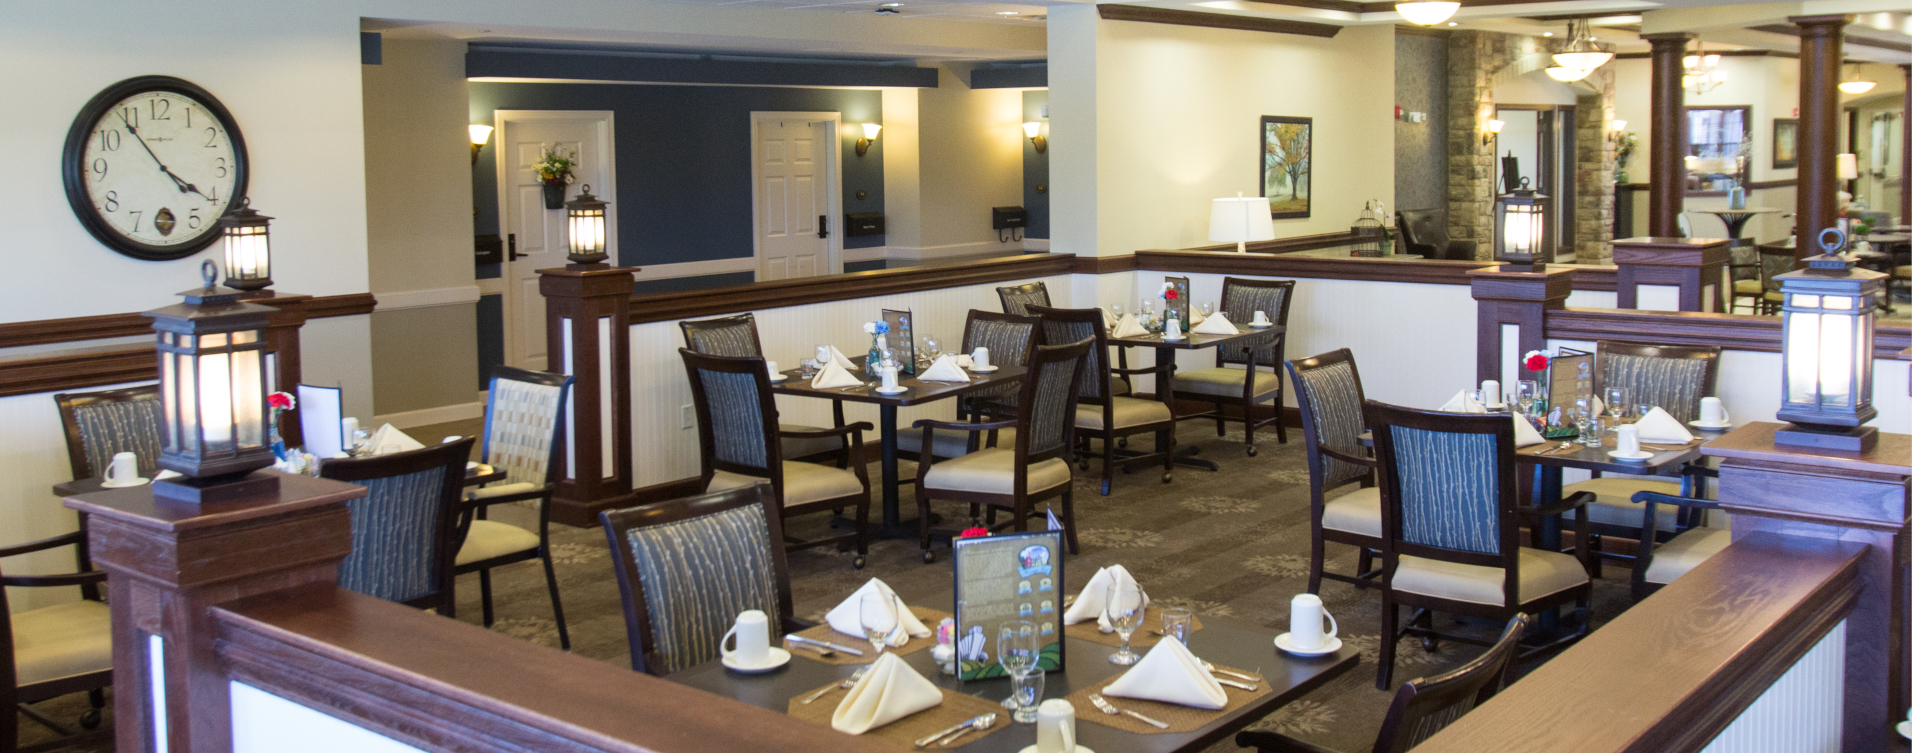 Enjoy homestyle food with made-from-scratch recipes in our dining room at Bickford of Tinley Park